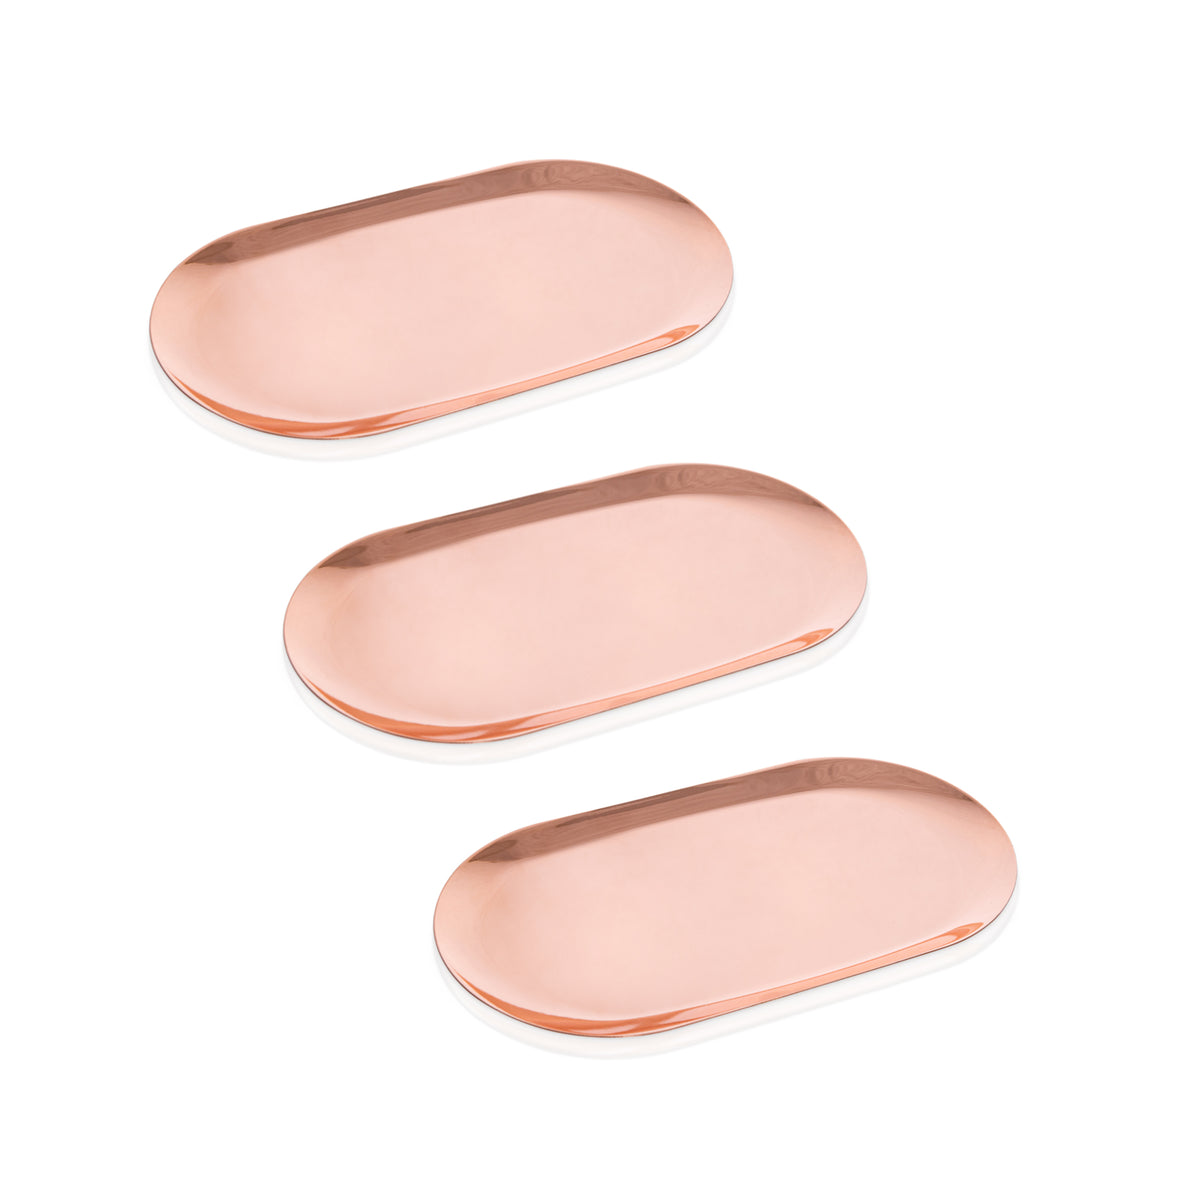 Candle Tray Rose Gold - 7 Inch (S), Set of 3